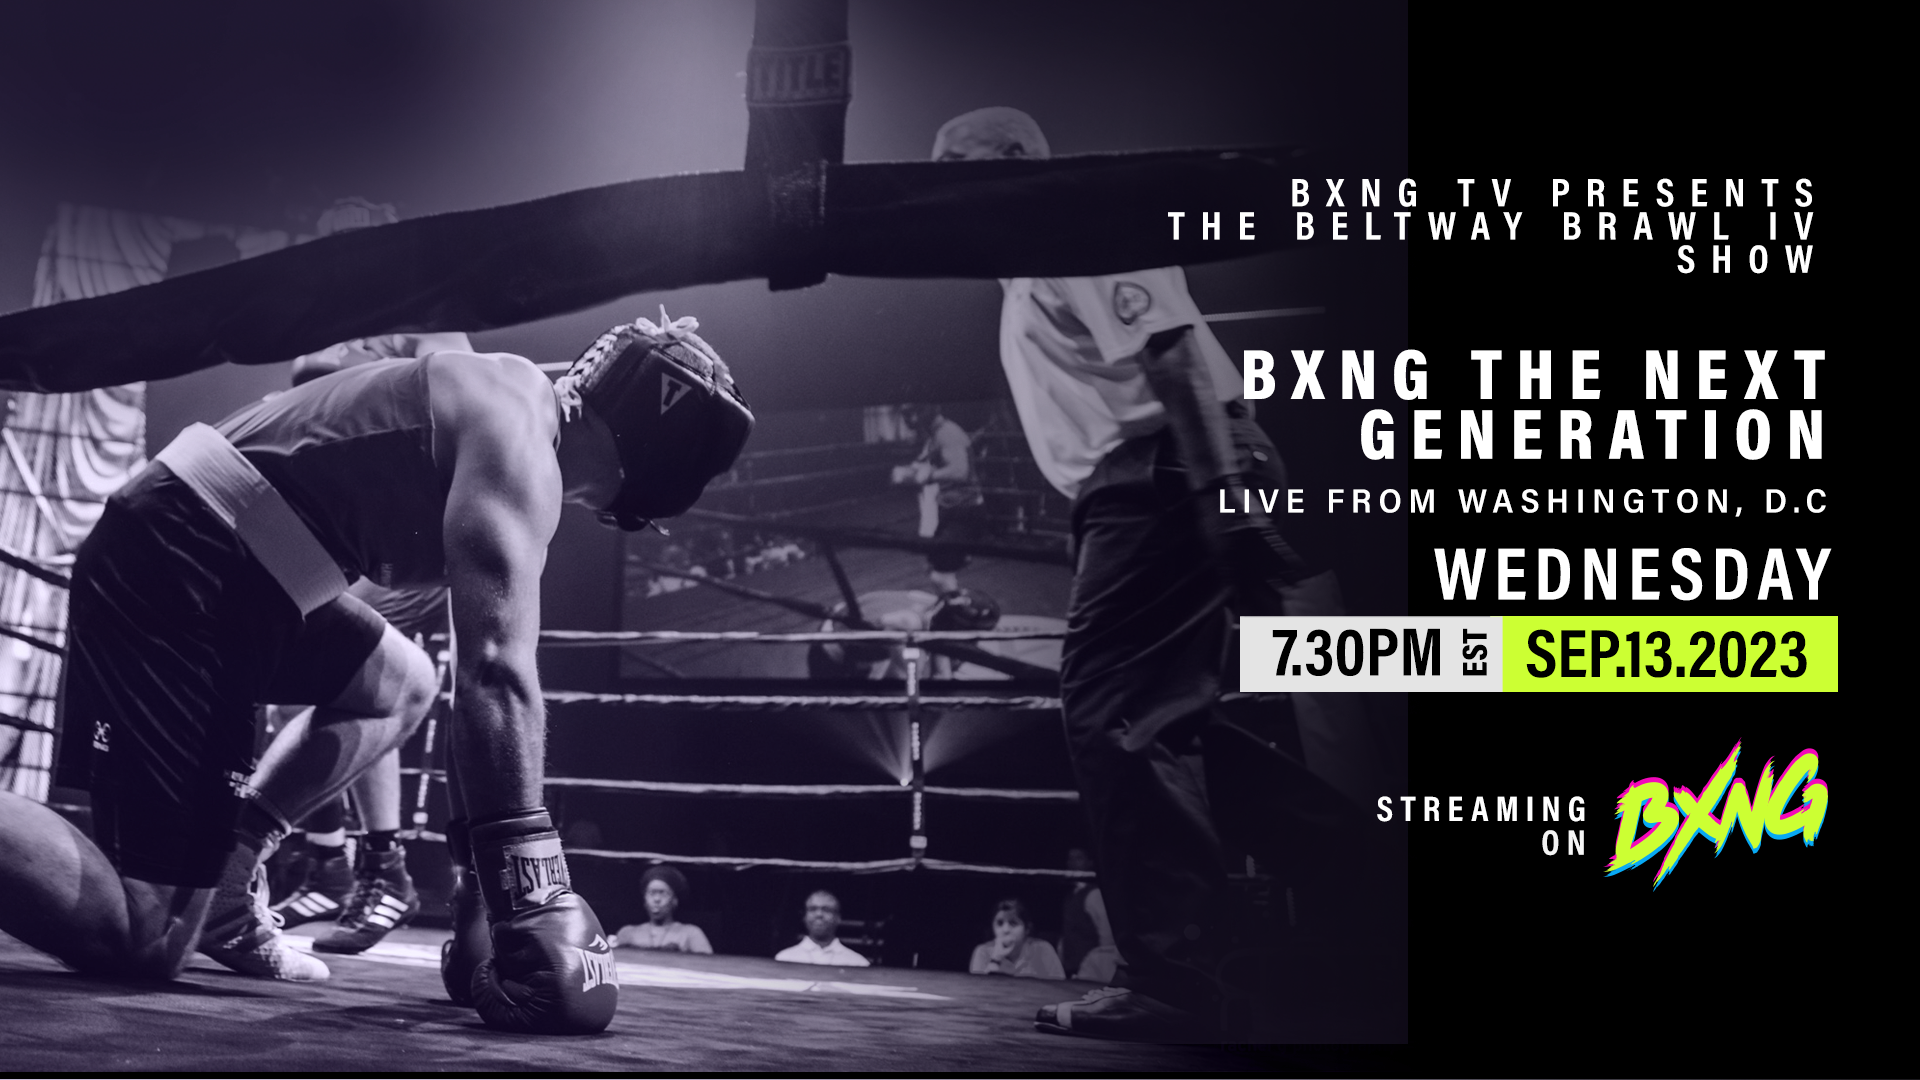 tv boxing live streaming